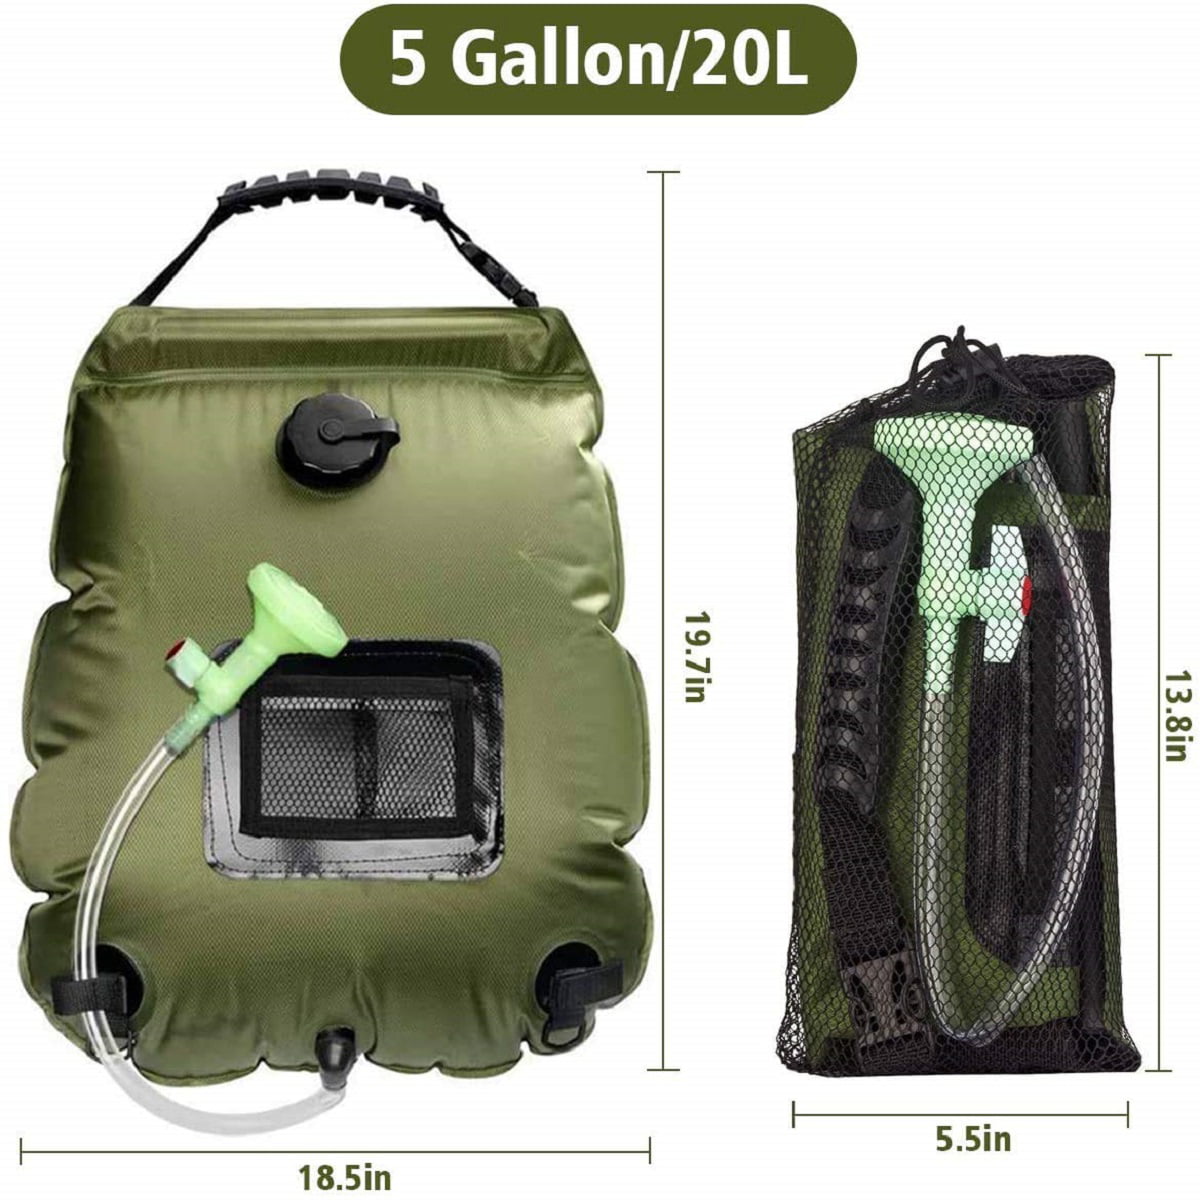 5 Gal/20L Solar Heating Camping Shower Bag for Beach Swimming Hiking Travel 